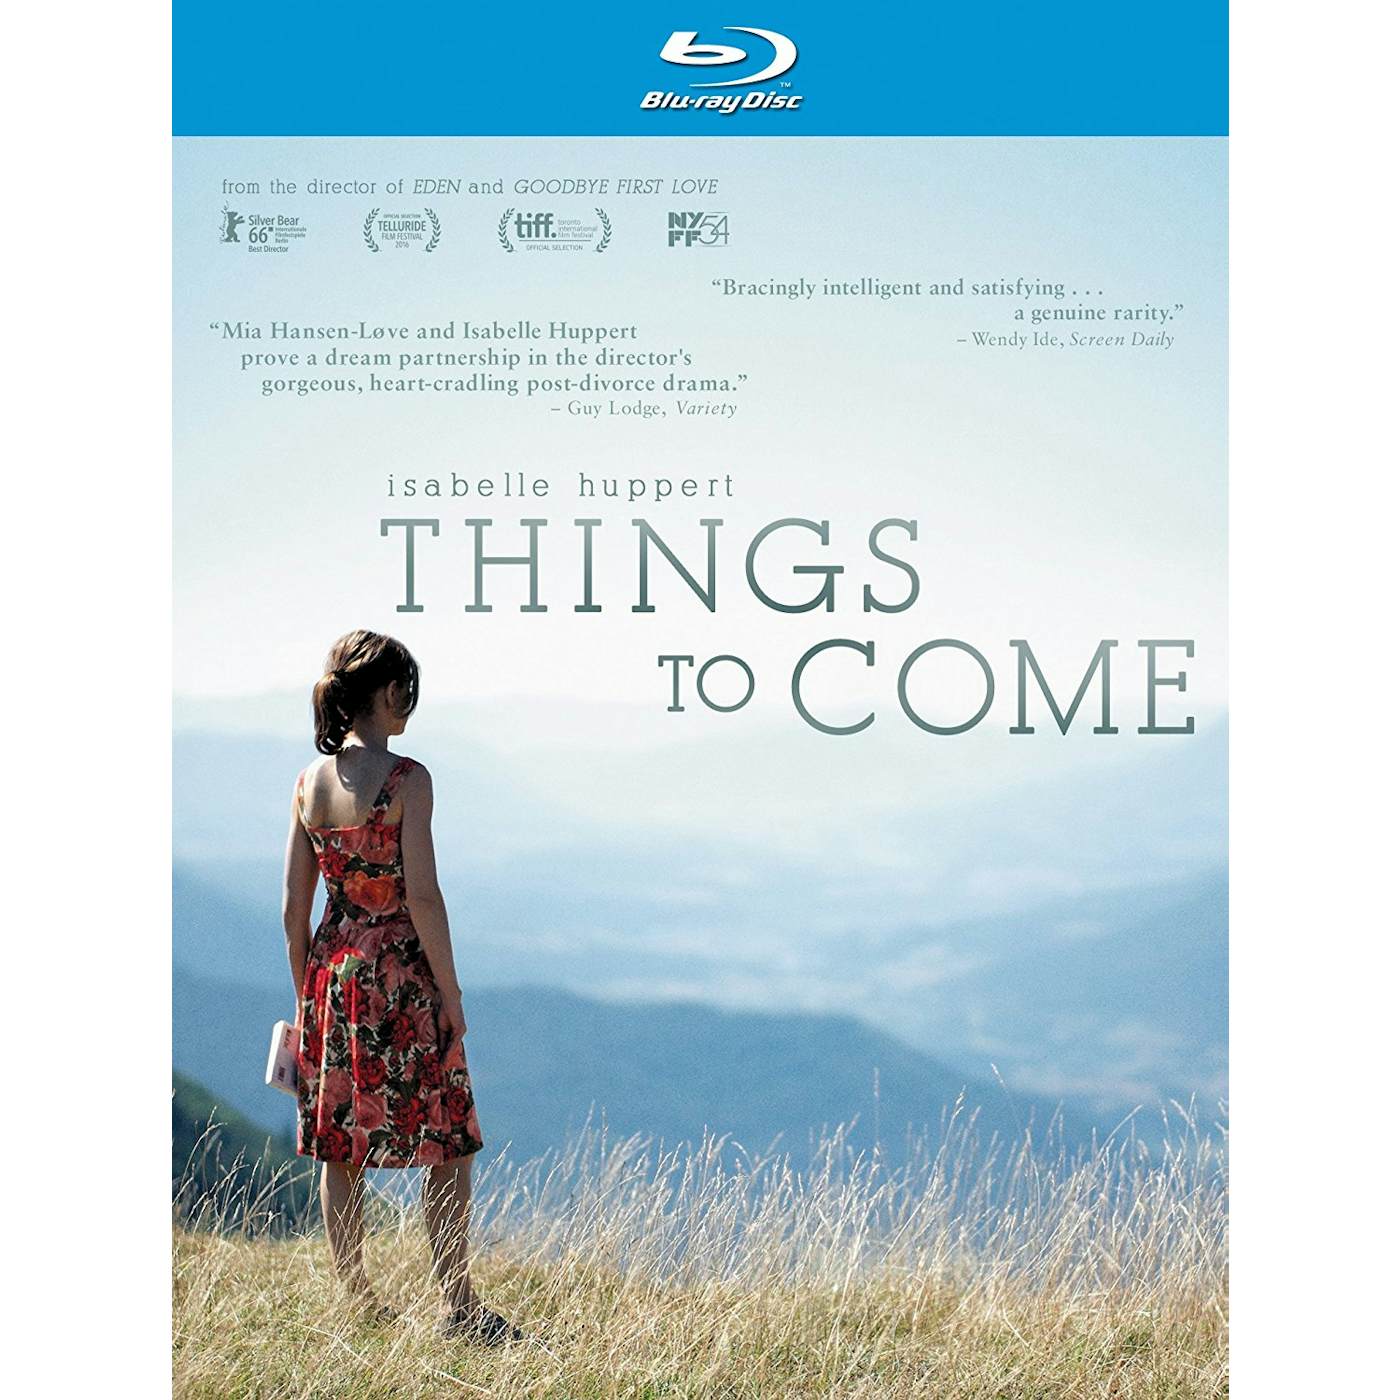 THINGS TO COME Blu-ray